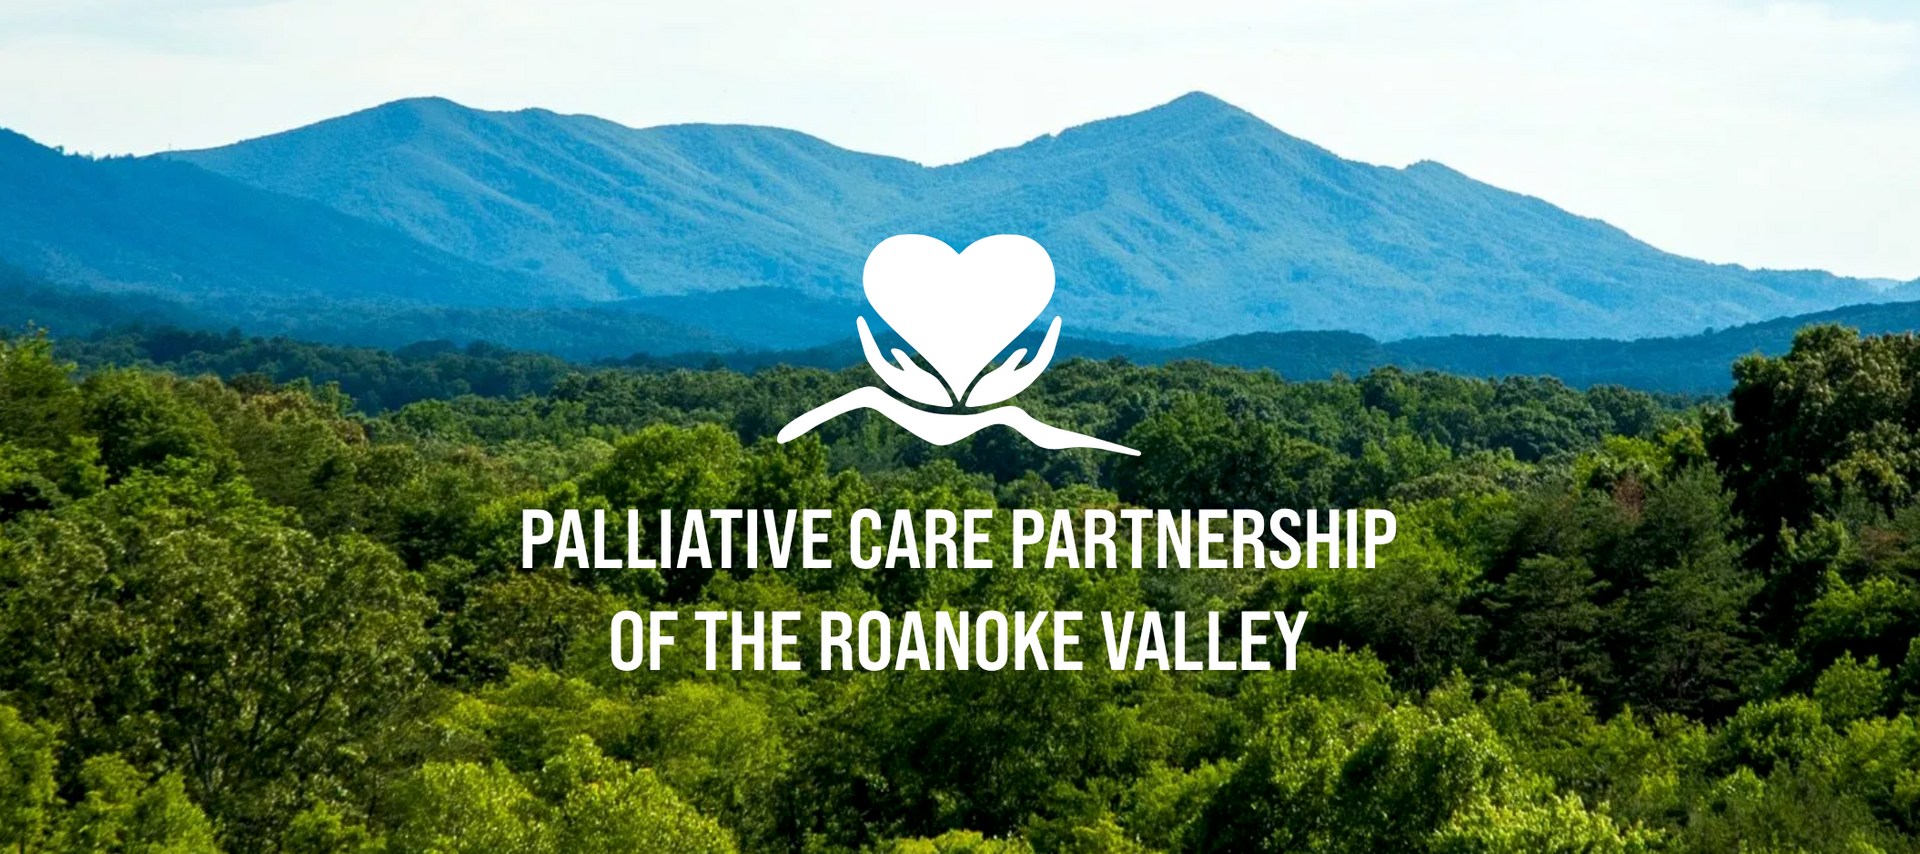 a logo for palliative care partnership of the roanoke valley